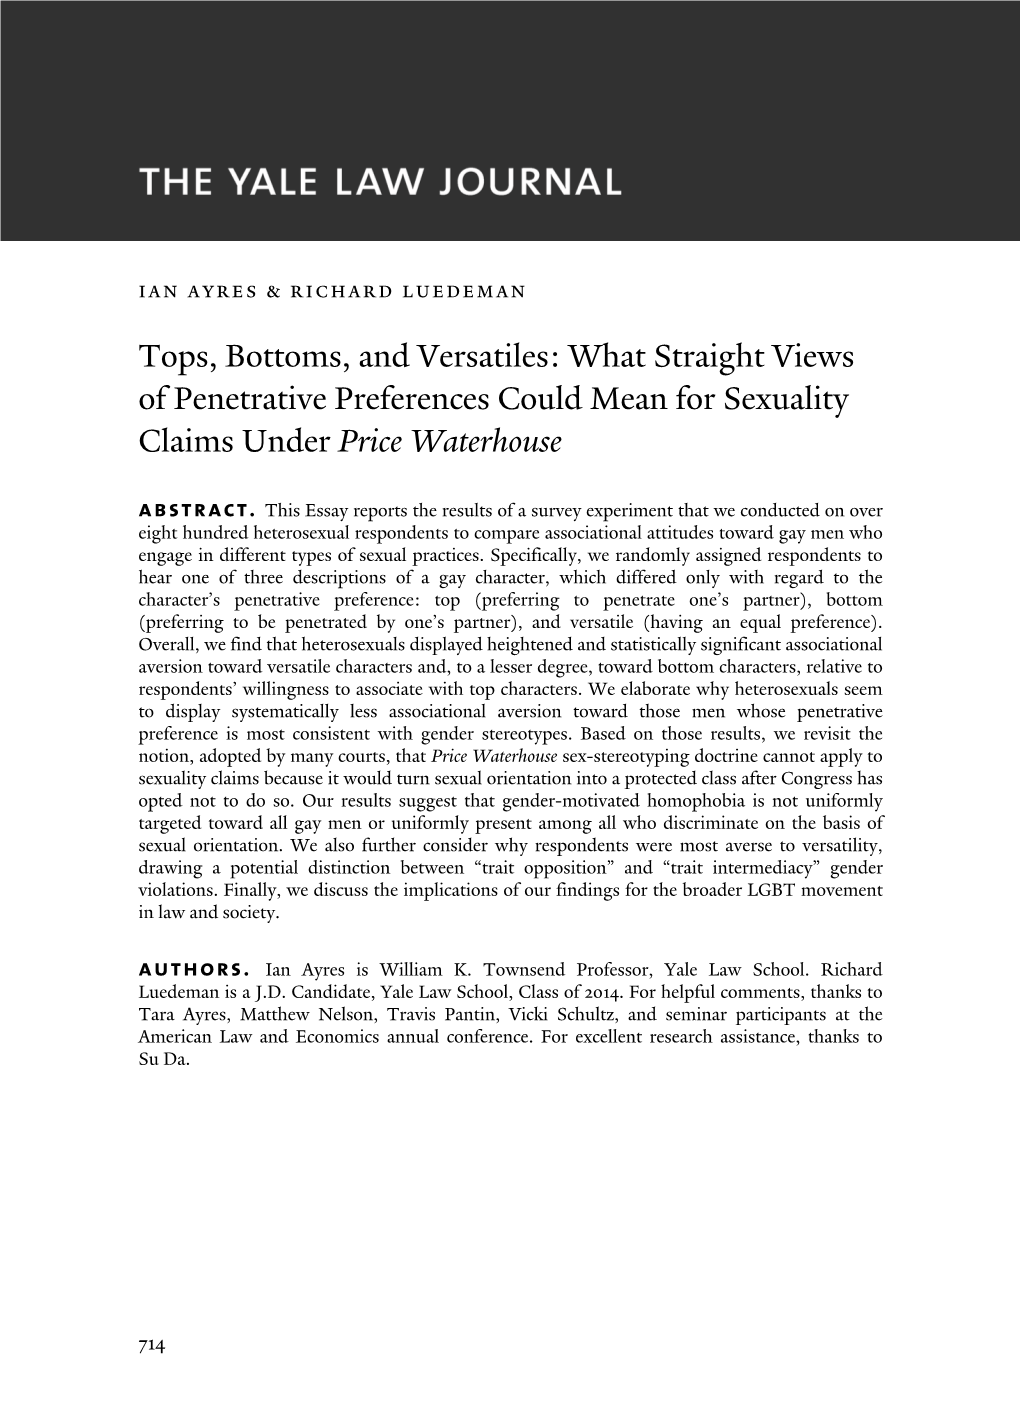 Tops, Bottoms, and Versatiles: What Straight Views of Penetrative Preferences Could Mean for Sexuality Claims Under Price Waterhouse Abstract